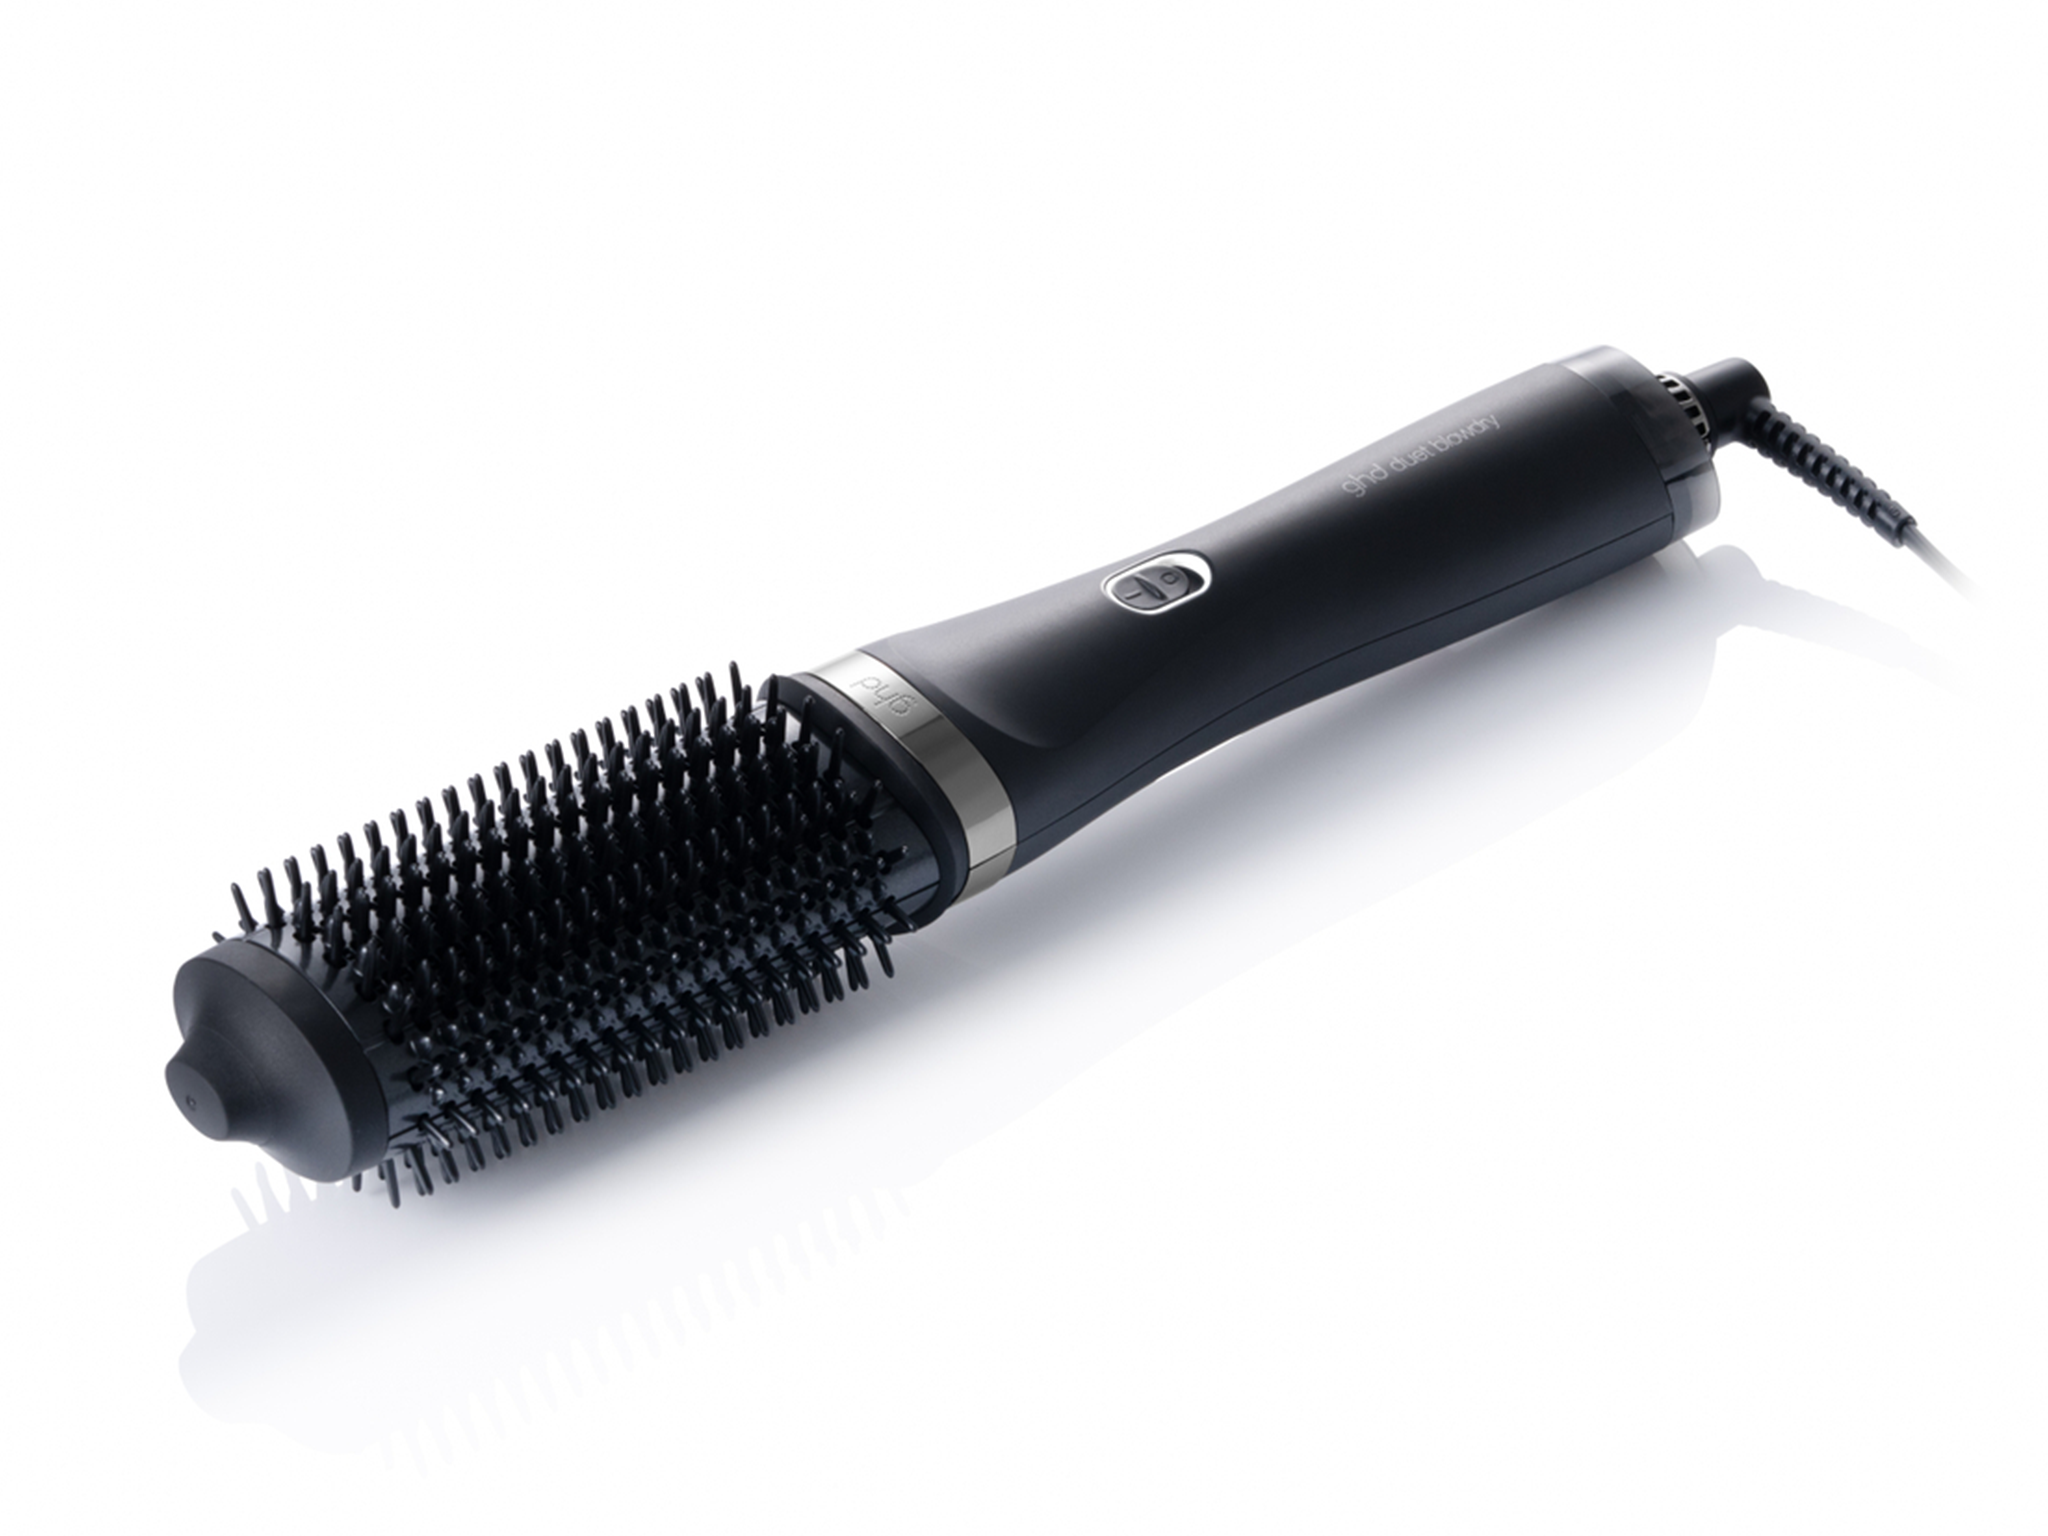 ghd duet blow dry brush IndyBest review